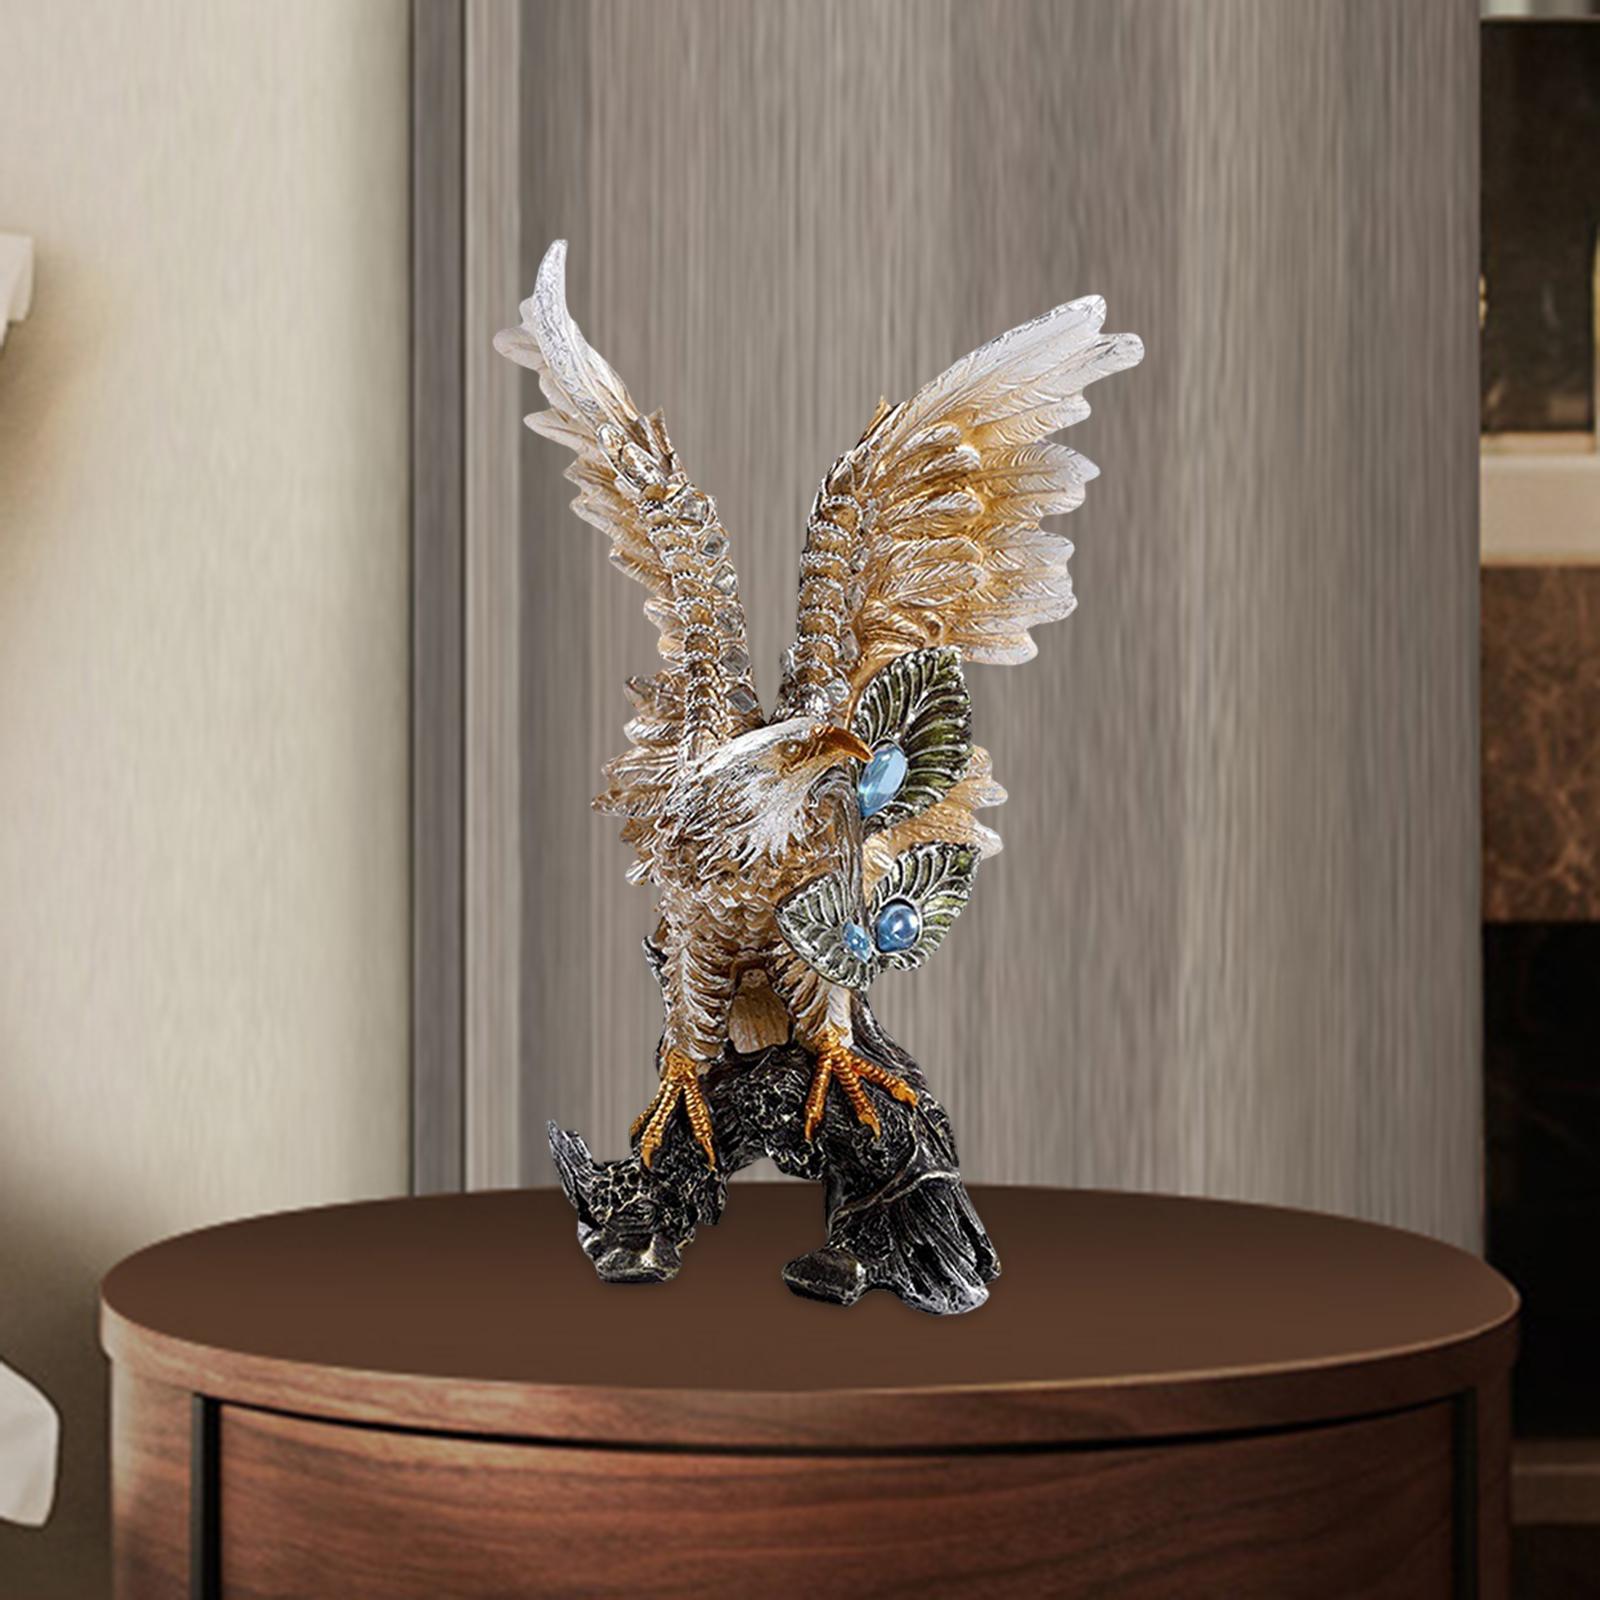 Eagle Sculpture Decorative Collection for Drawing Room Tabletop Studio Style B